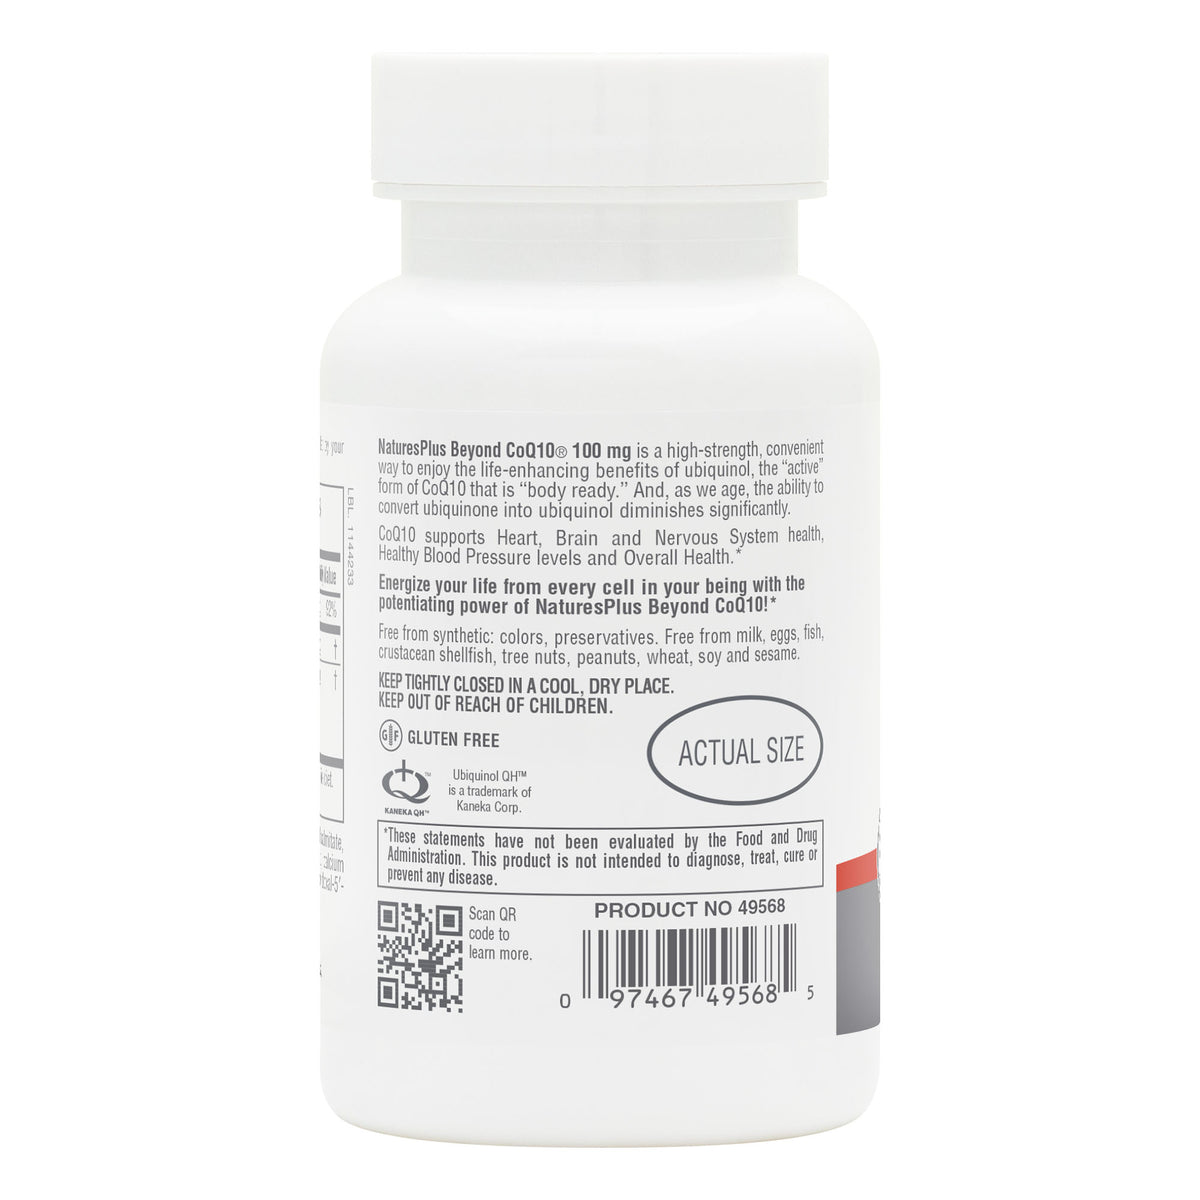 product image of Beyond CoQ10® 100 mg Softgels containing 30 Count